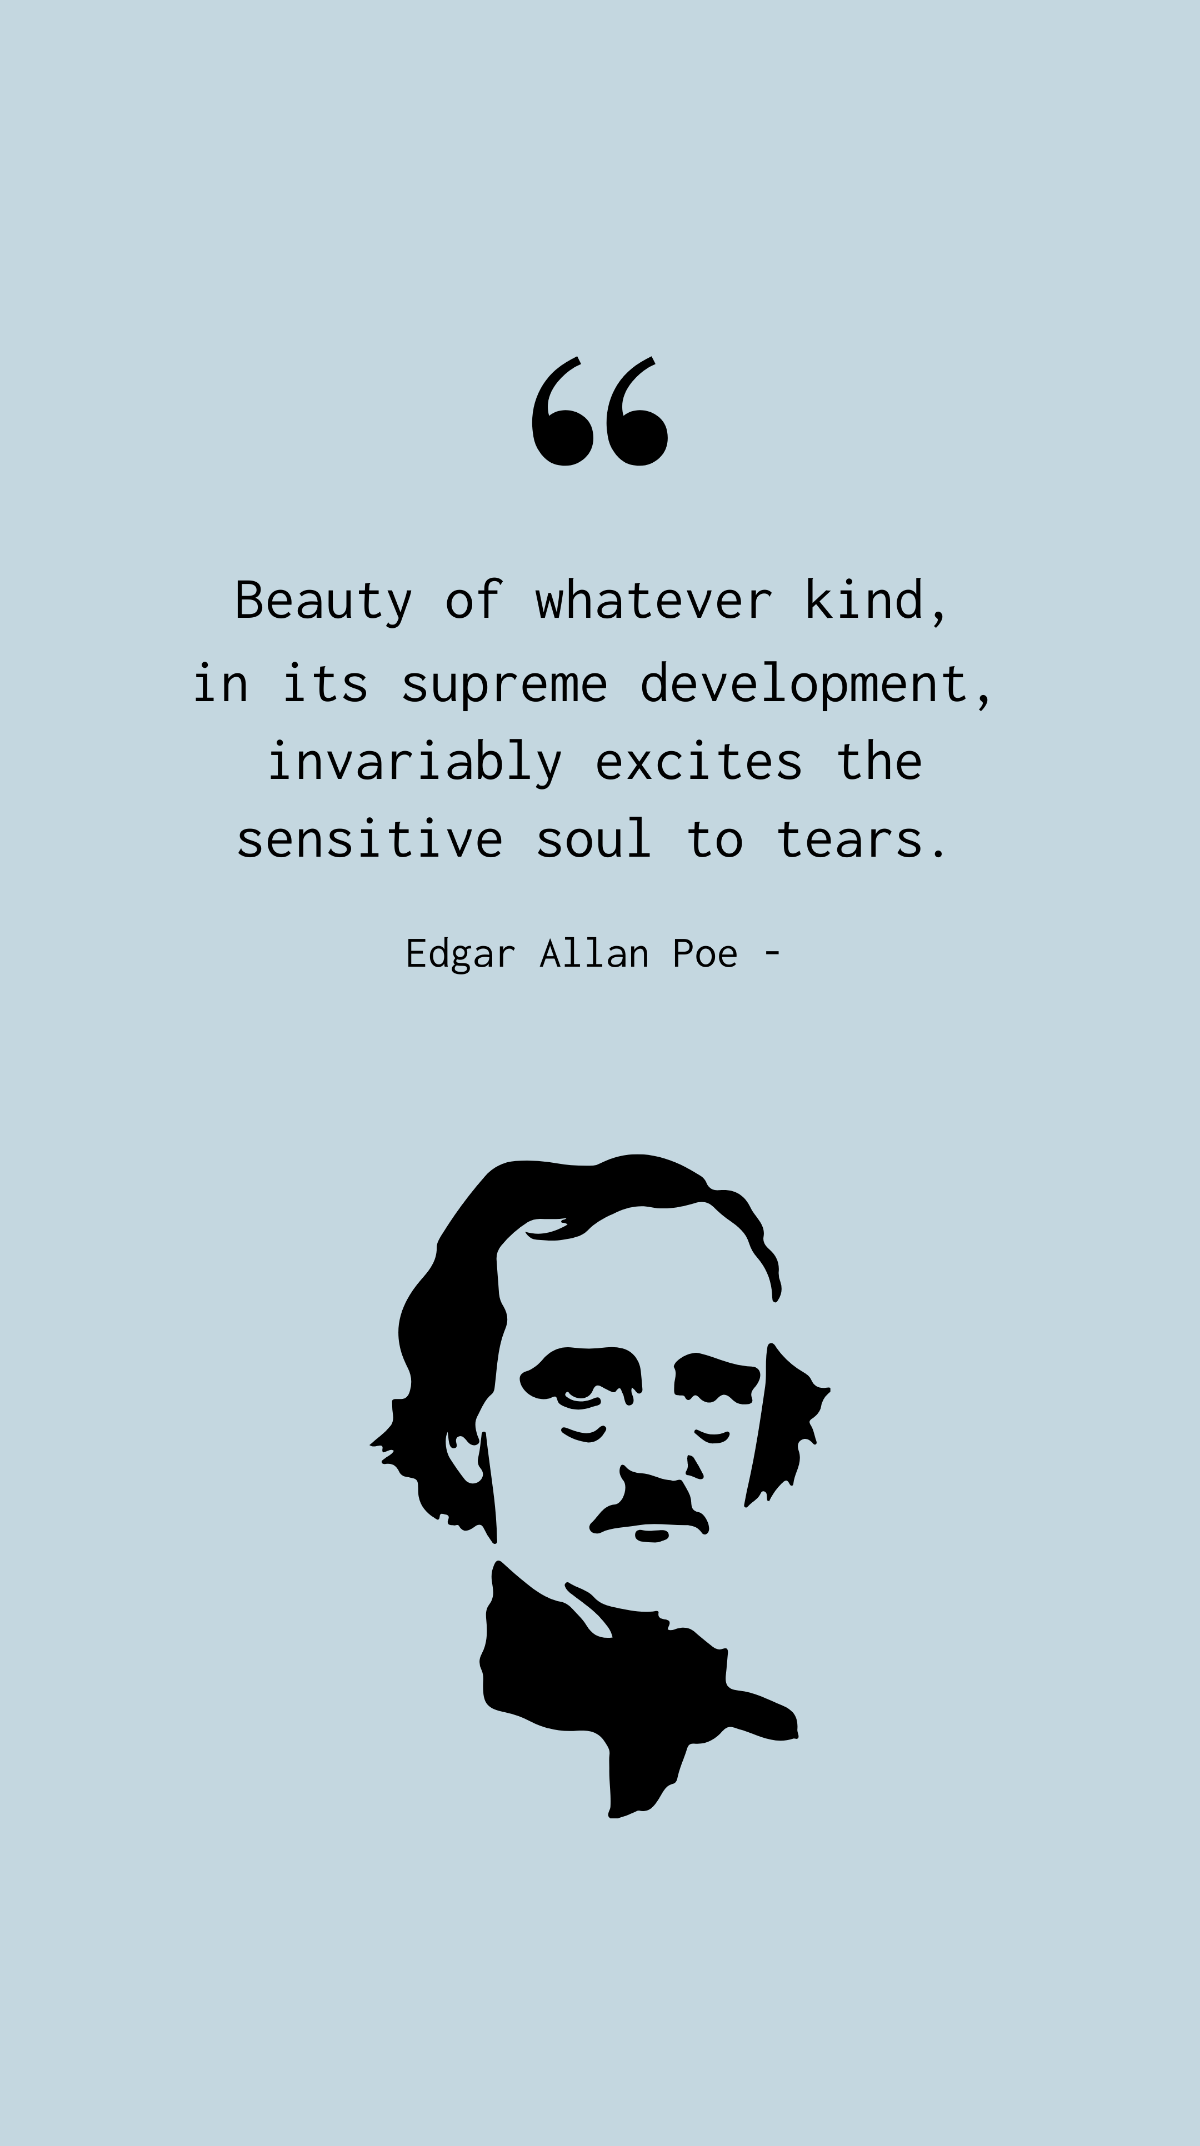 Free Edgar Allan Poe - Beauty of whatever kind, in its supreme development, invariably excites the sensitive soul to tears. Template